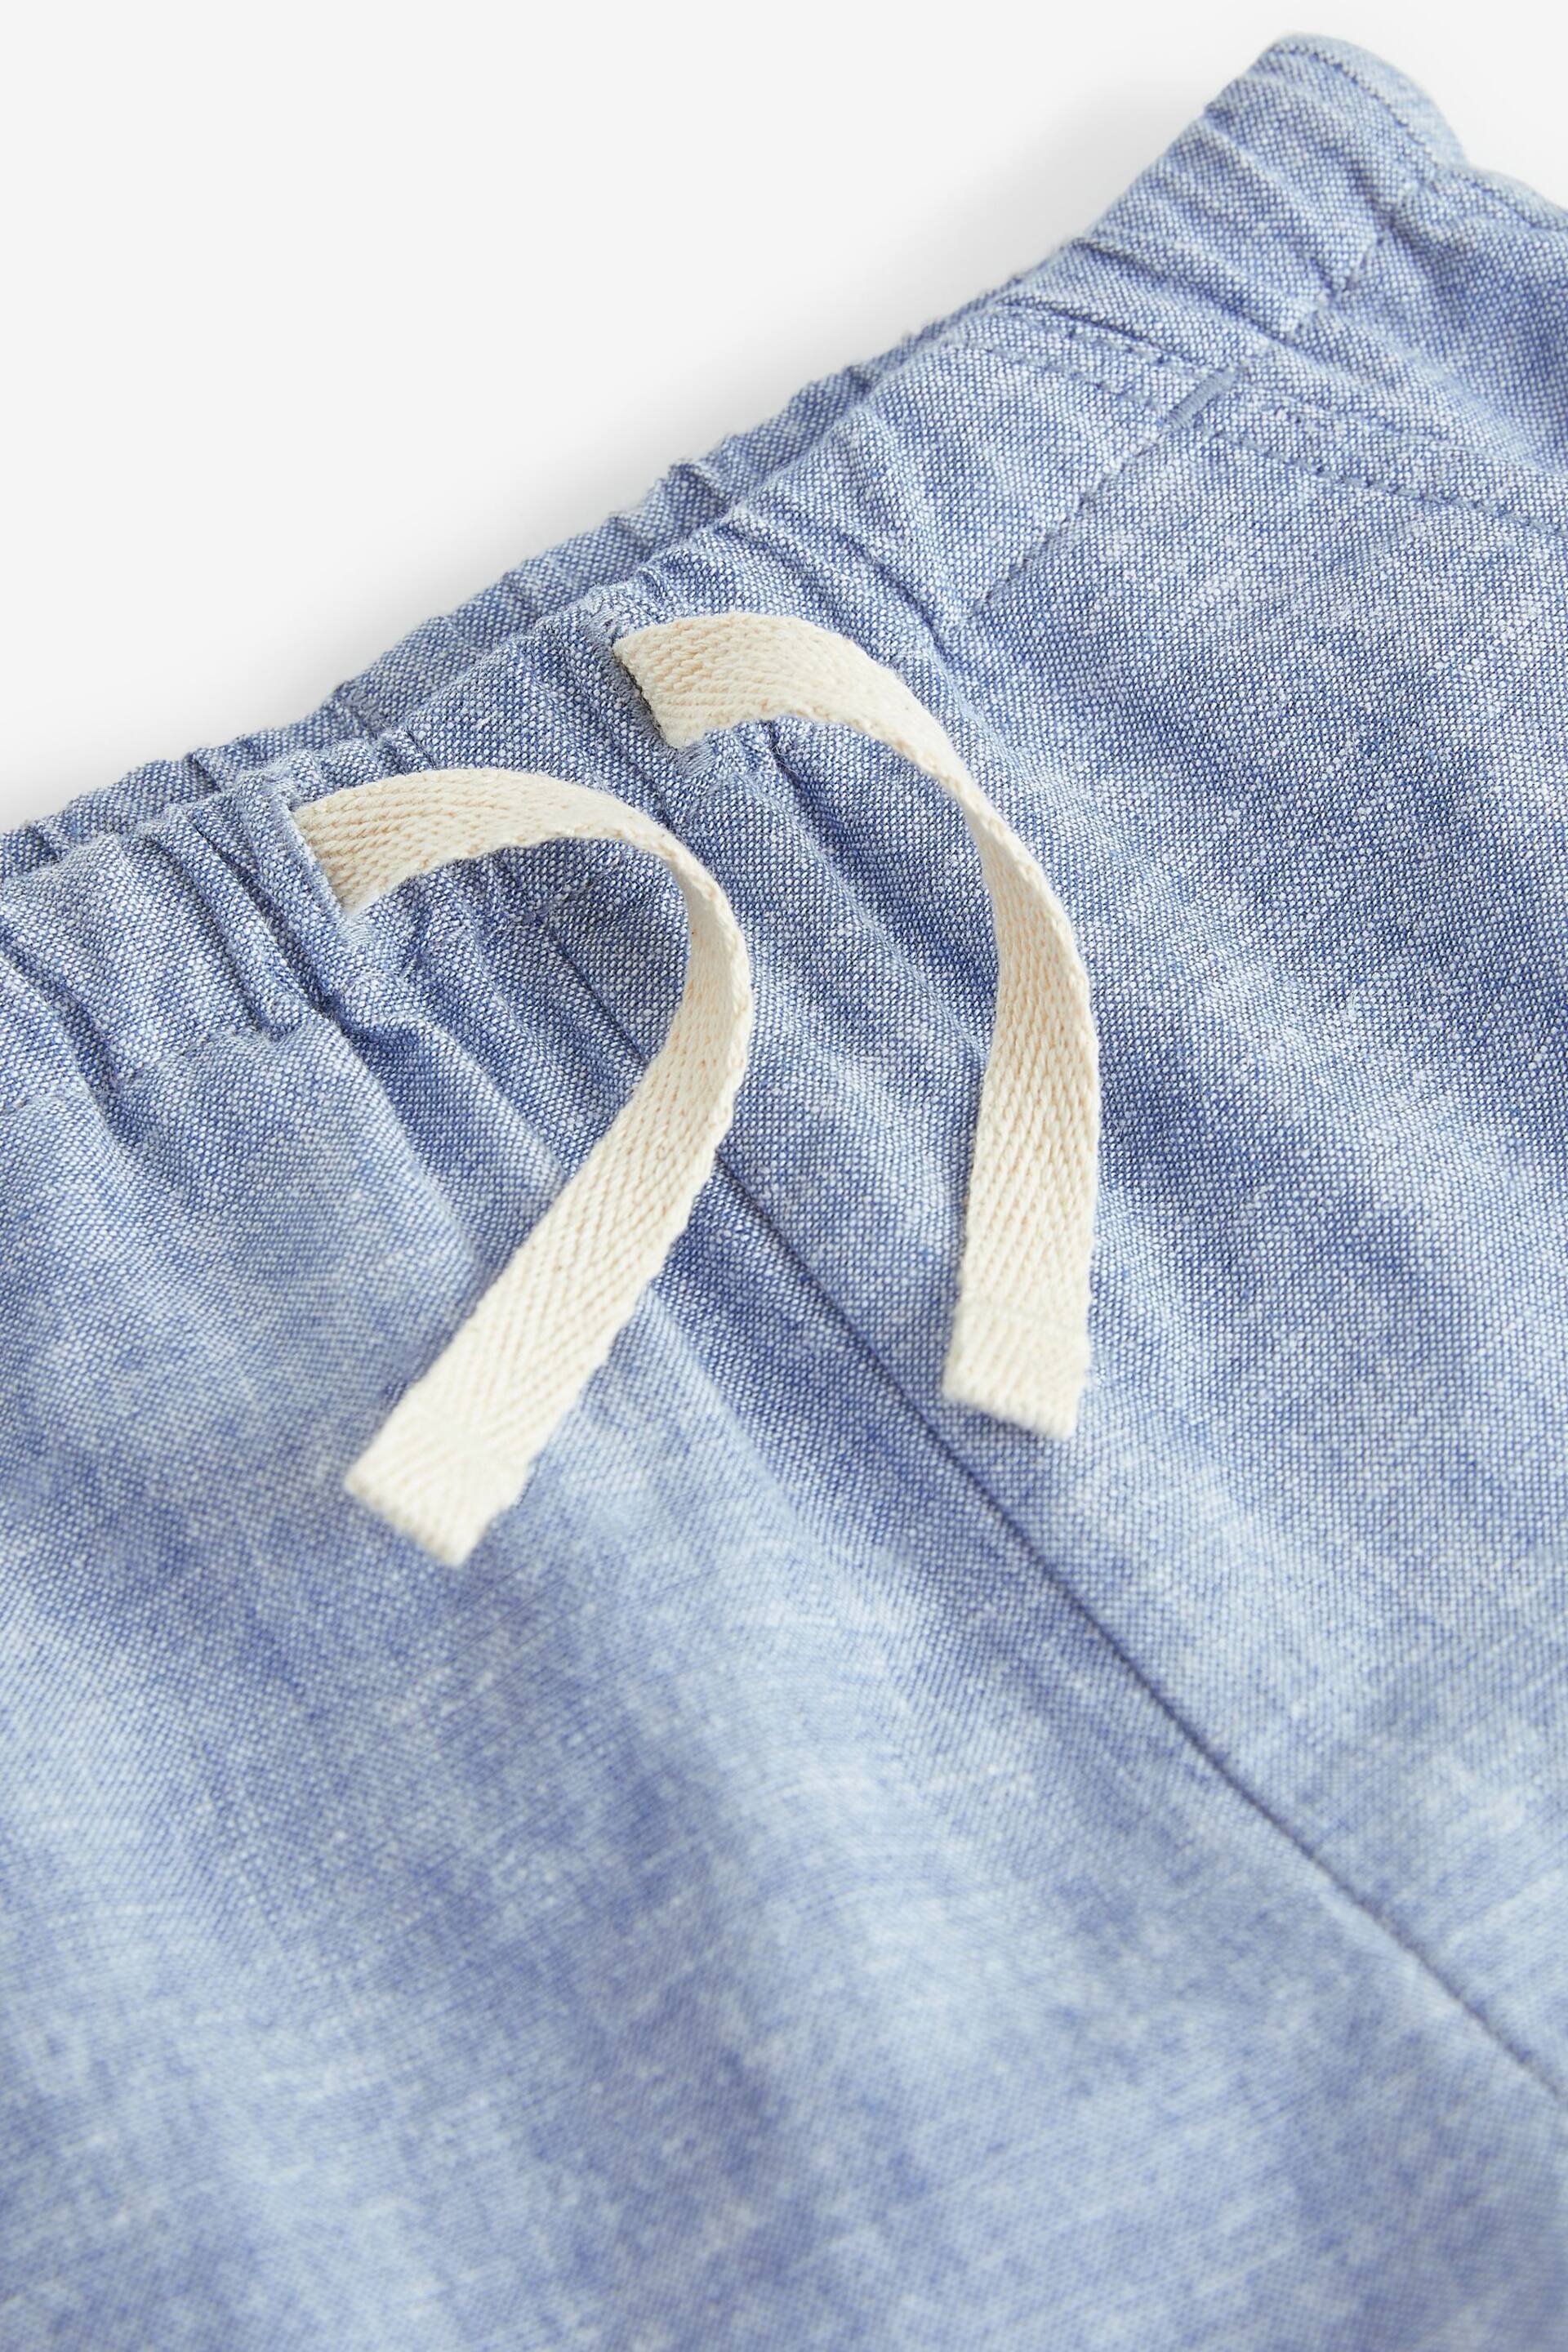 Chambray Blue Linen Blend Pull-On Shorts (3mths-7yrs) - Image 6 of 6